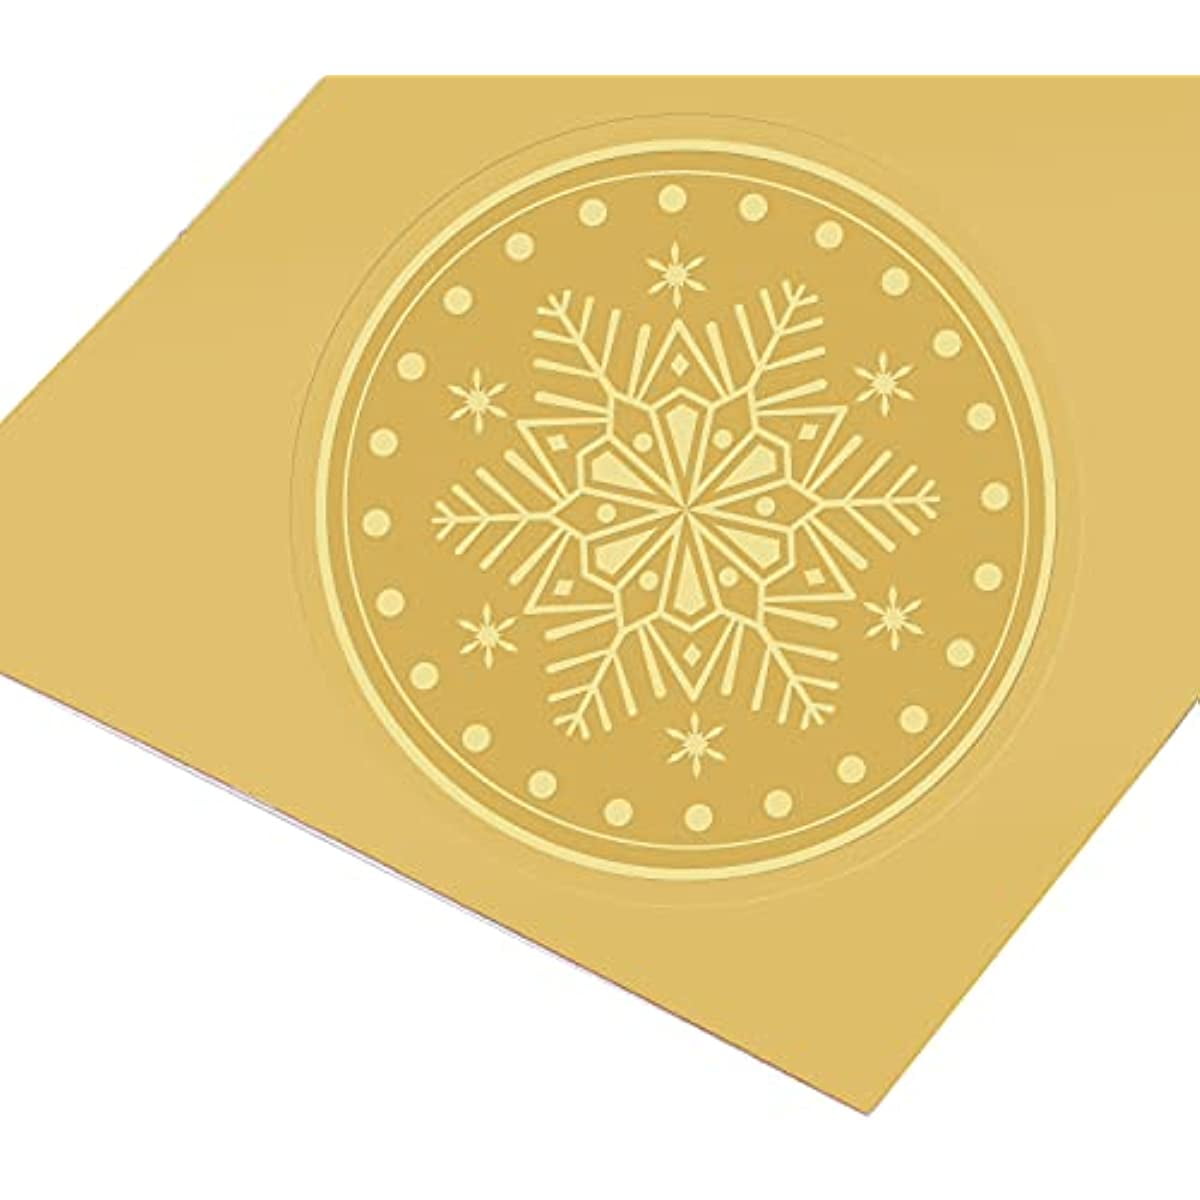 CRASPIRE 100pcs Gold Foil Crown Stickers Embossed Gold Certificate Seals 2 Round Self Adhesive Embossed Stickers for Wedding Invitations Envelope